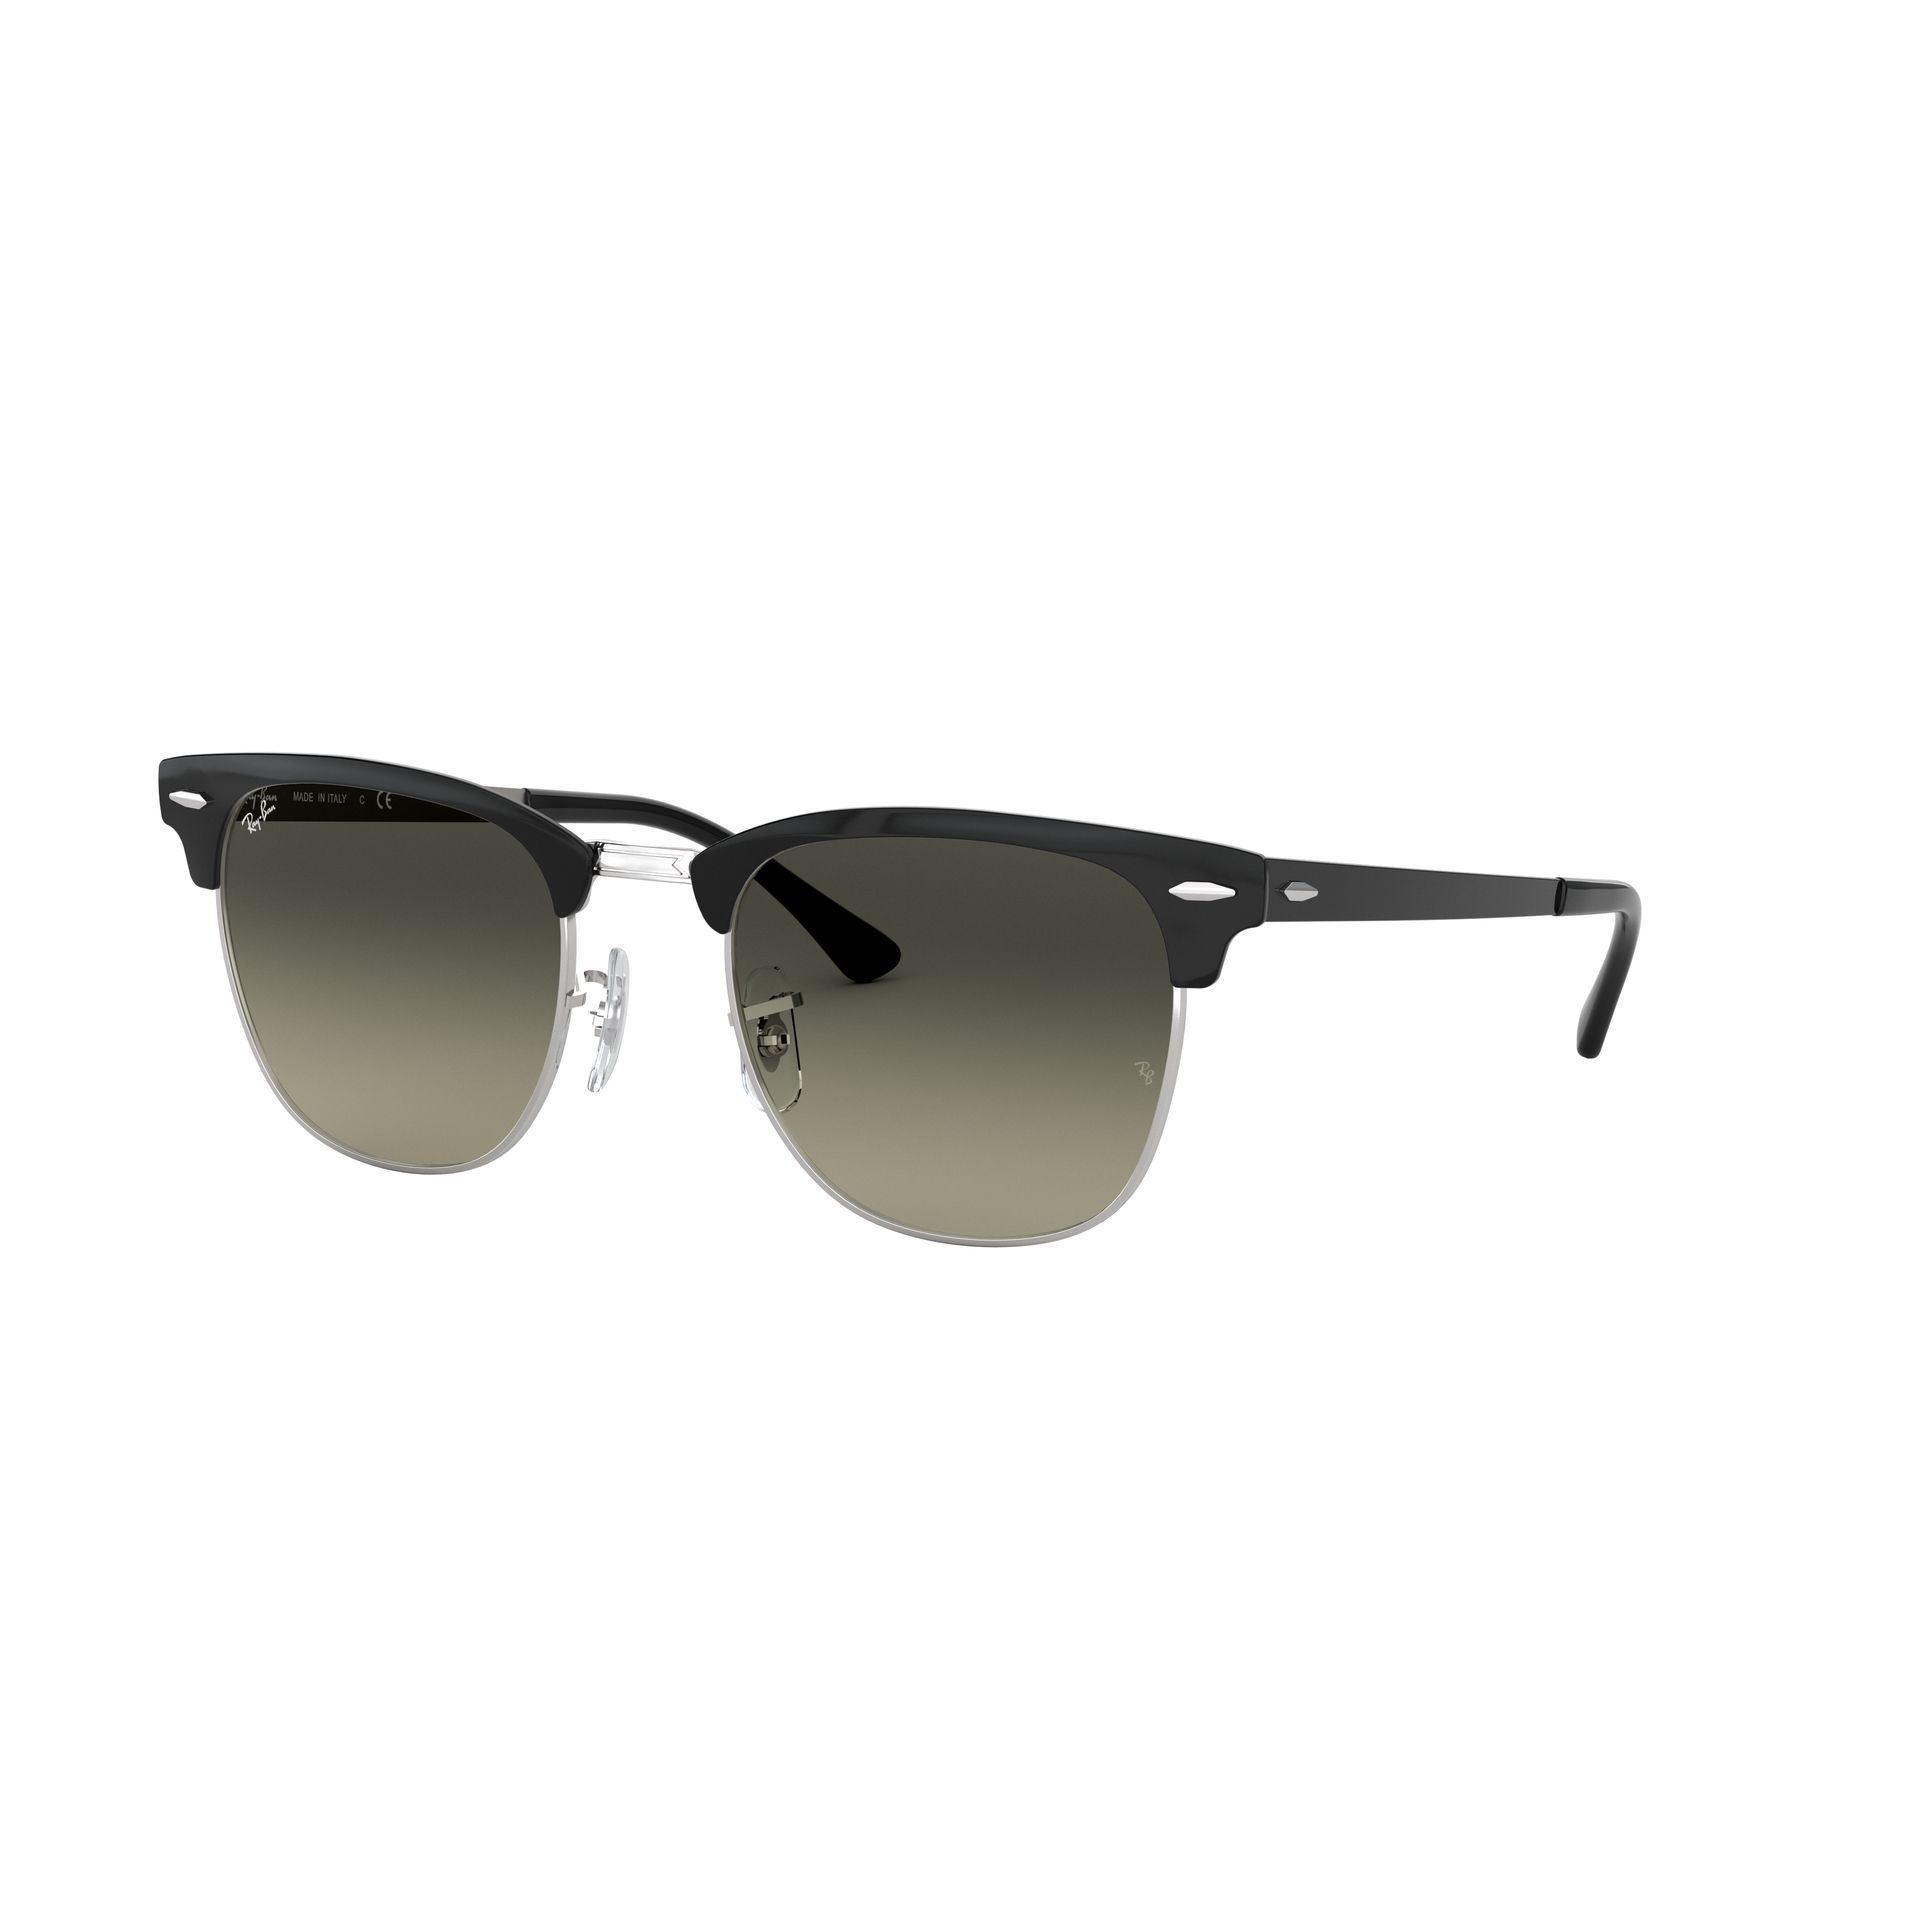 Clubmaster Sunglasses RB3716 - size 51